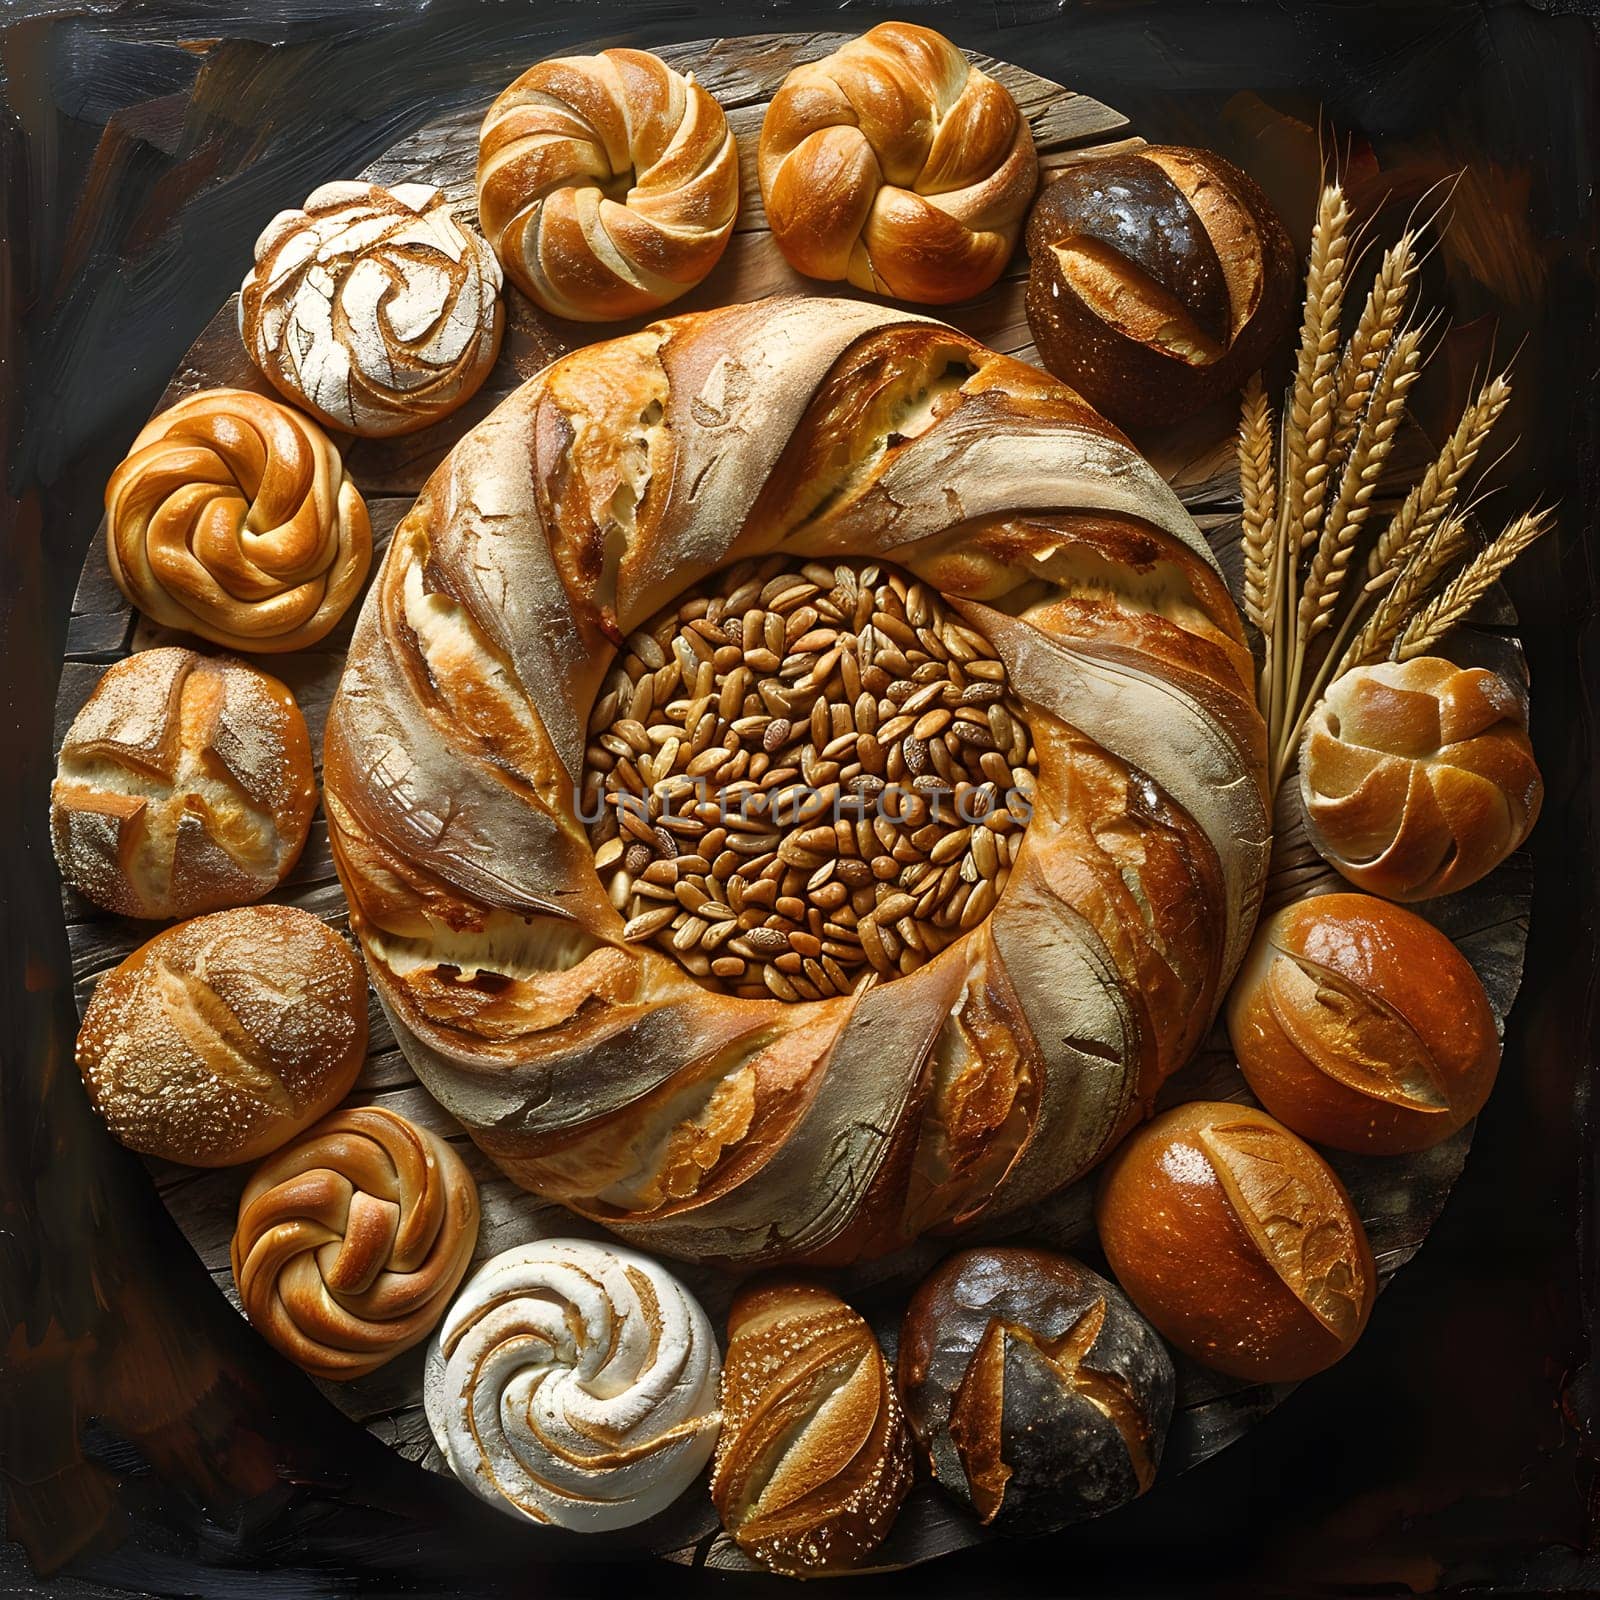 A variety of bread types, made with ingredients like flour, water, and seeds, are artfully arranged in a circular display. The wooden dishware highlights the beauty of different cuisines and recipes